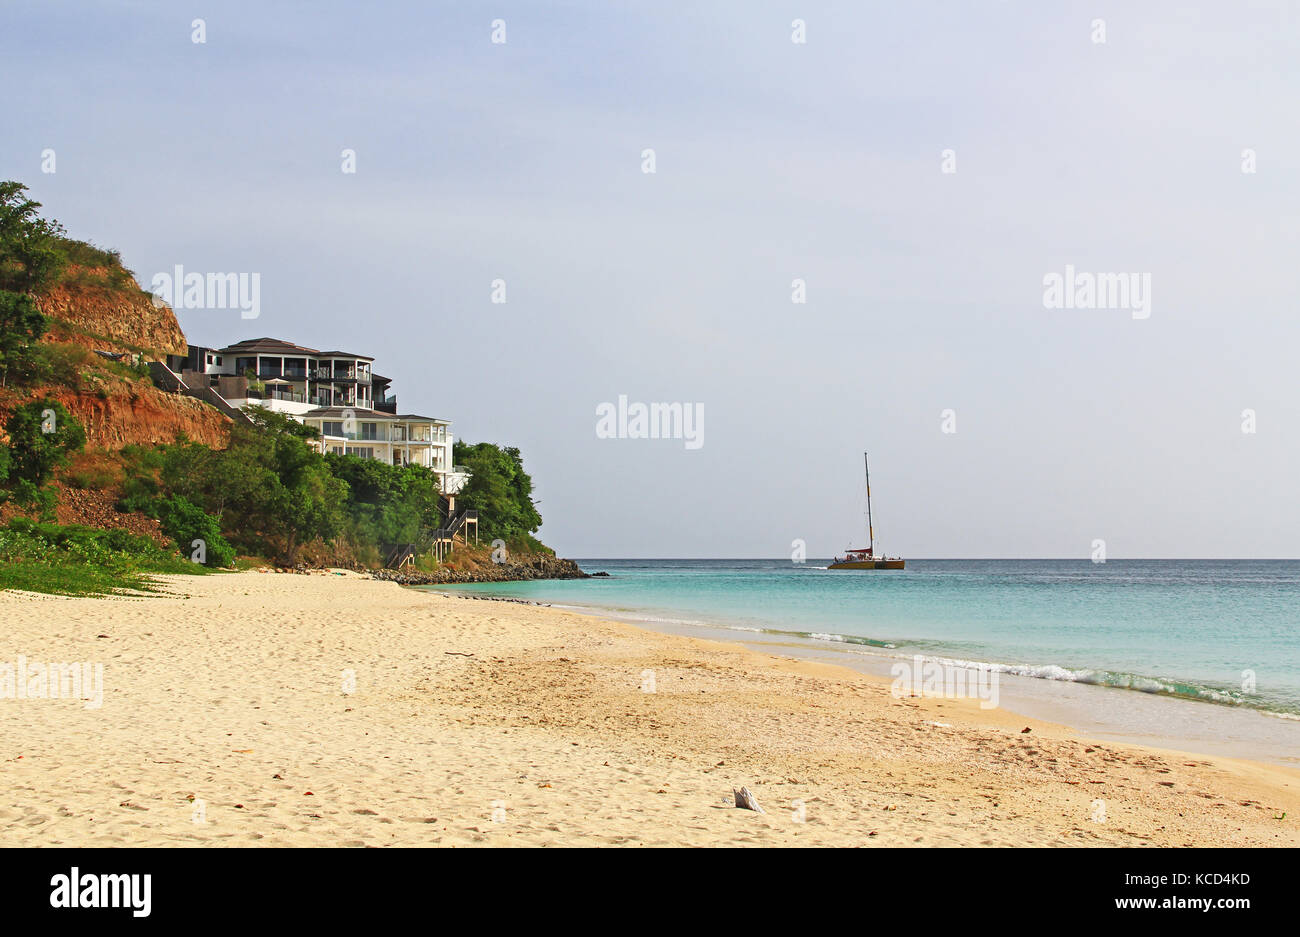 Mansion on a Cliff with Catamaran on the Sea Stock Photo